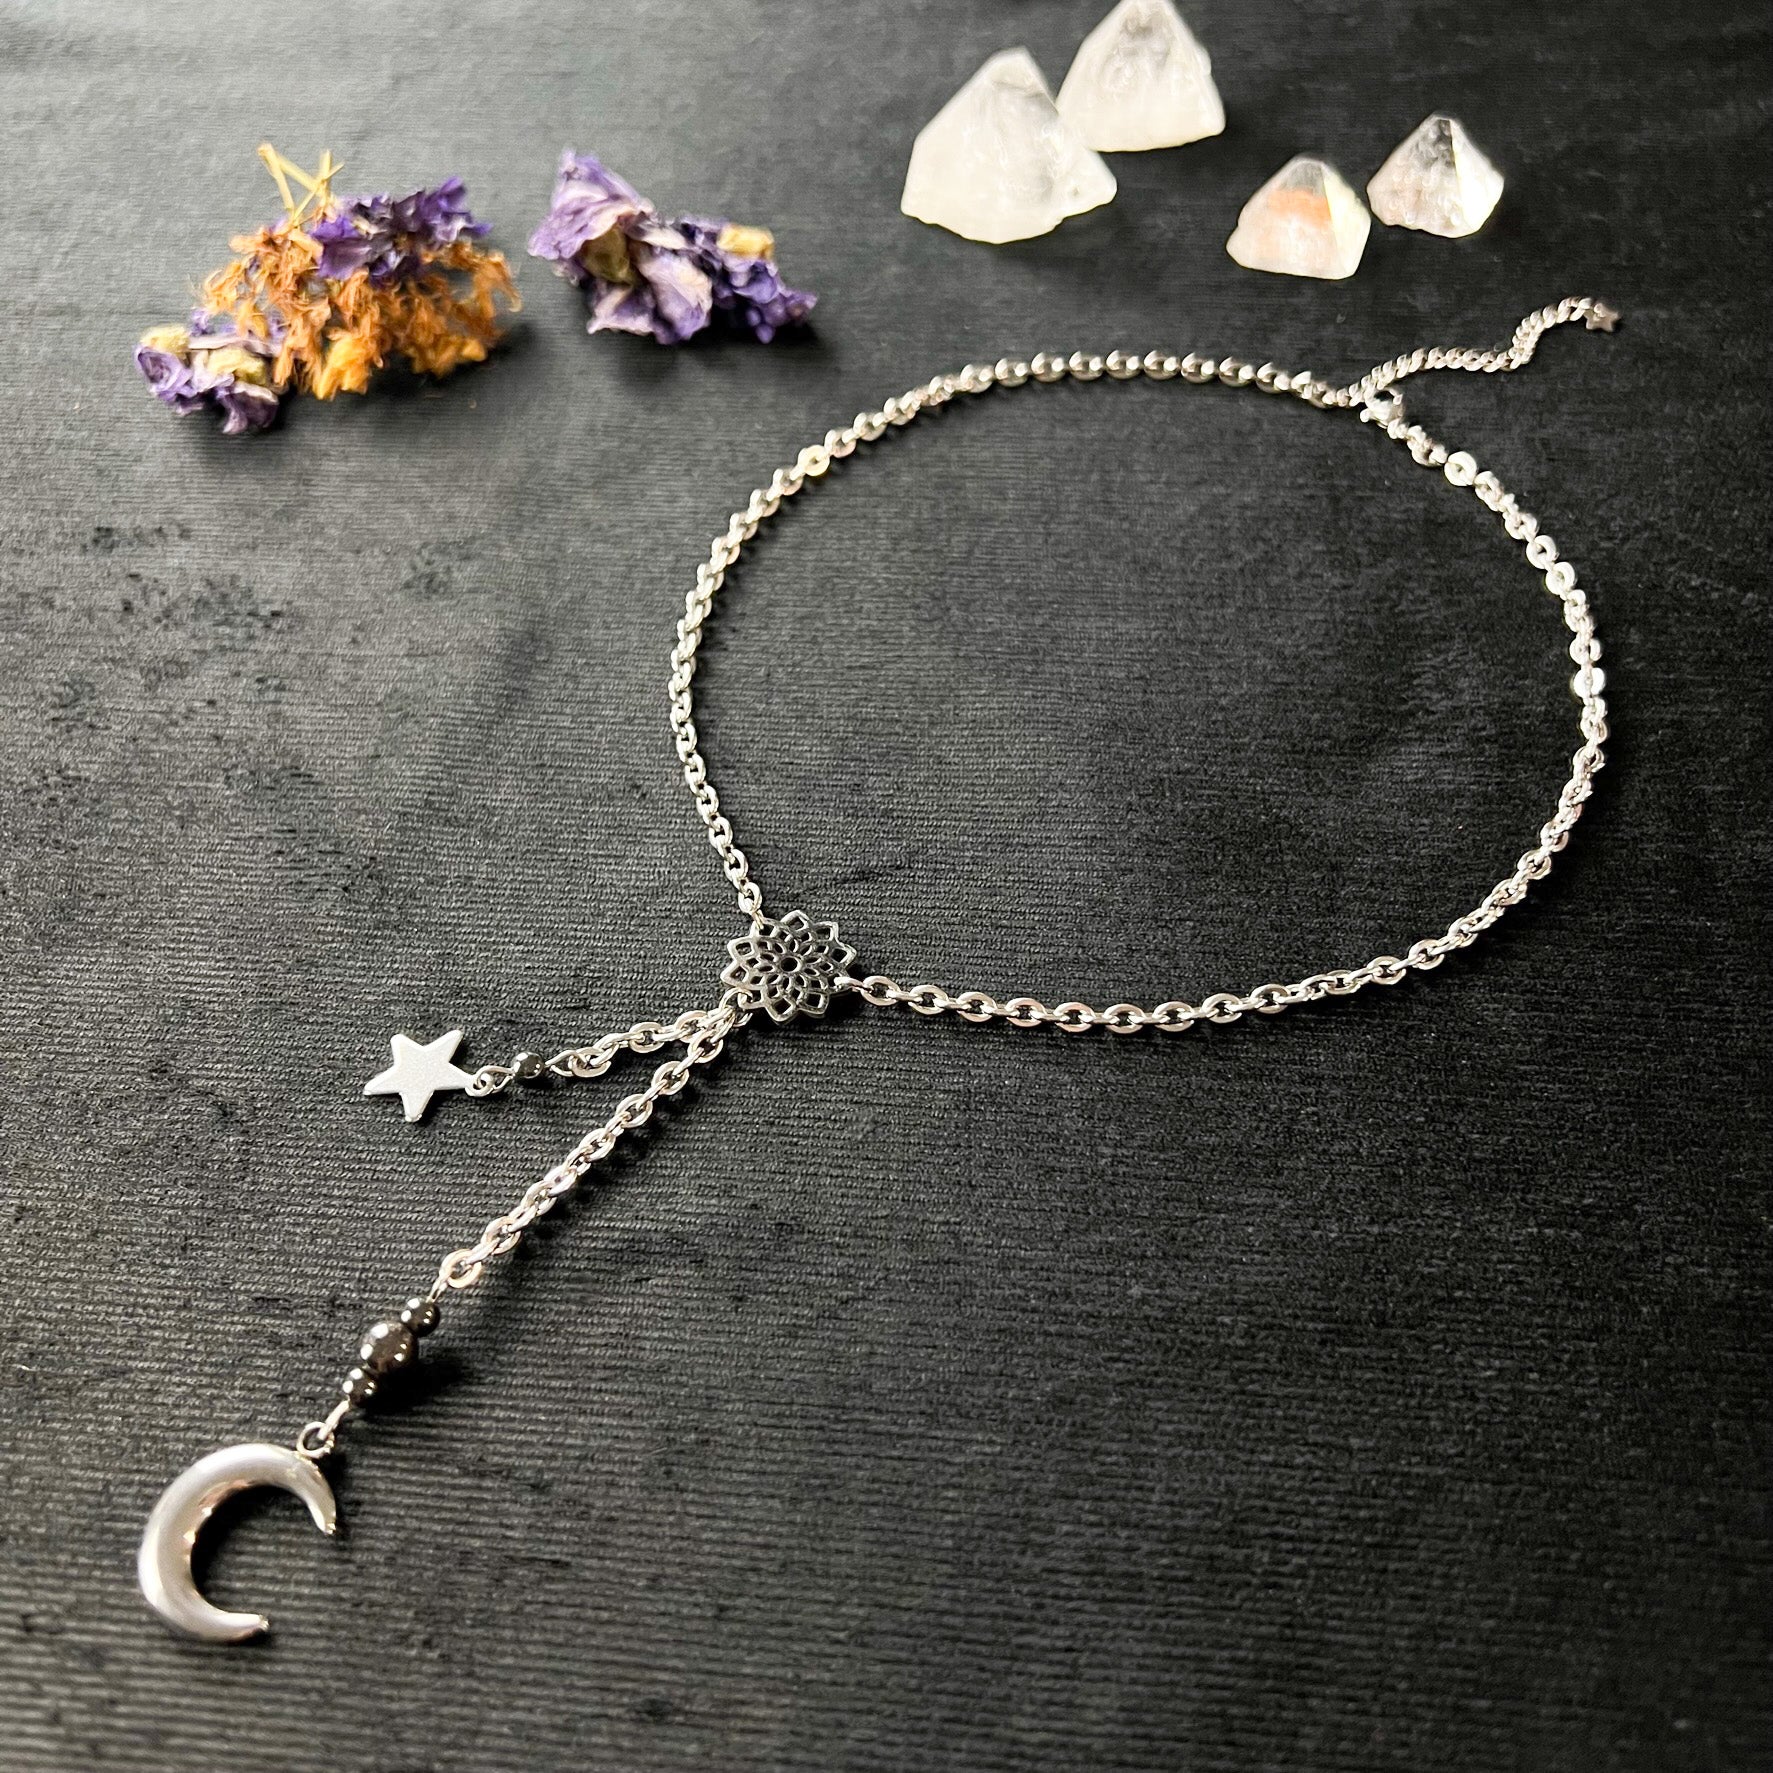 Celestial Y necklace stainless steel jewelry with star, mandala and crescent moon charm gothic necklace alternative jewelry